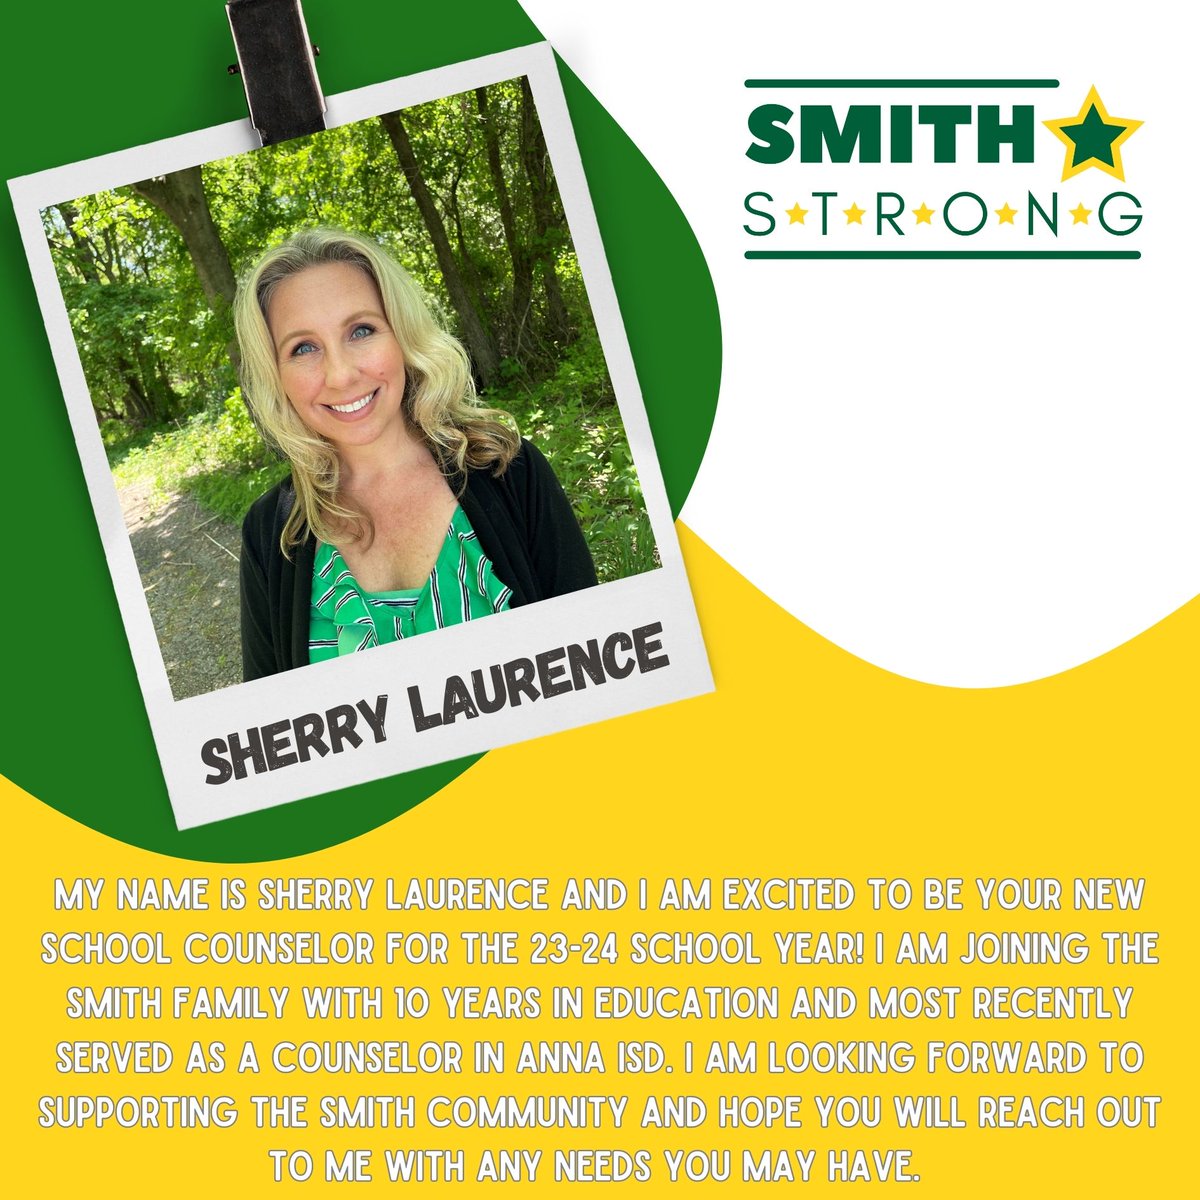 #SMITHSTRONG💪, help us welcome Sherry Laurence to Smith Elementary! She will be our new Counselor here at Smith Elementary!💪💚⭐️